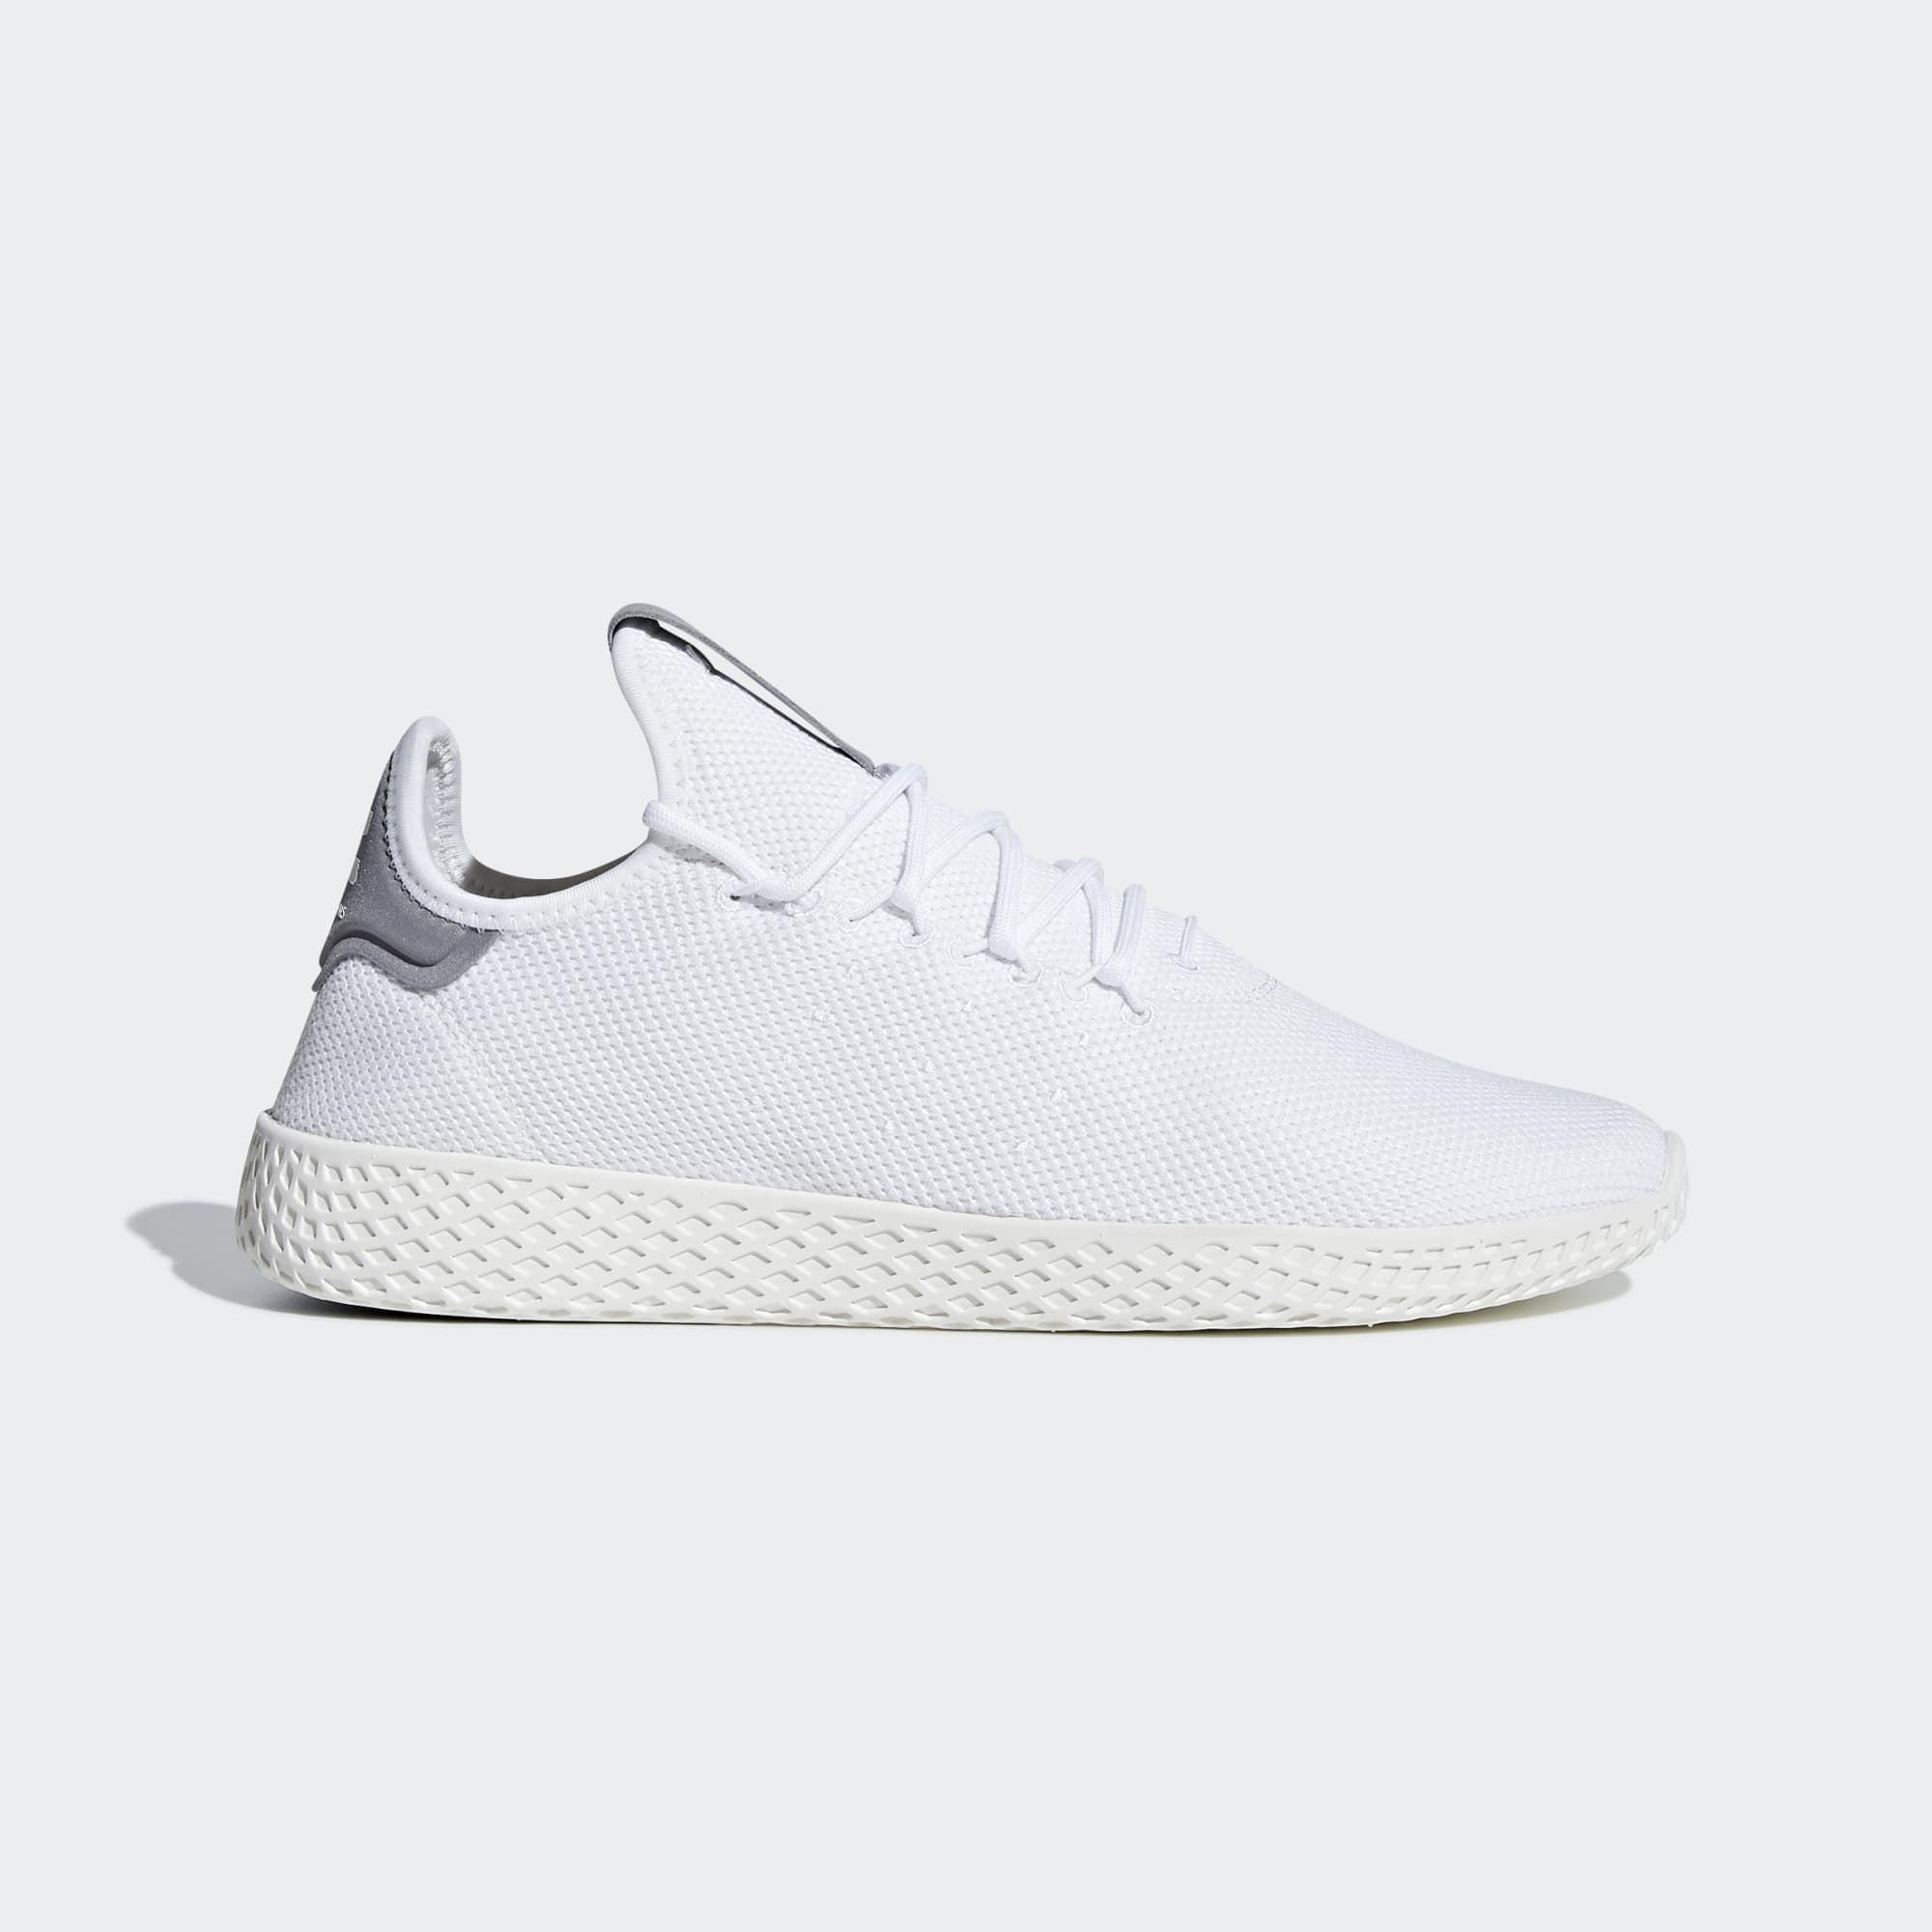 adidas Lace Pharrell Williams Tennis Hu Shoes in White Grey (White) - Lyst